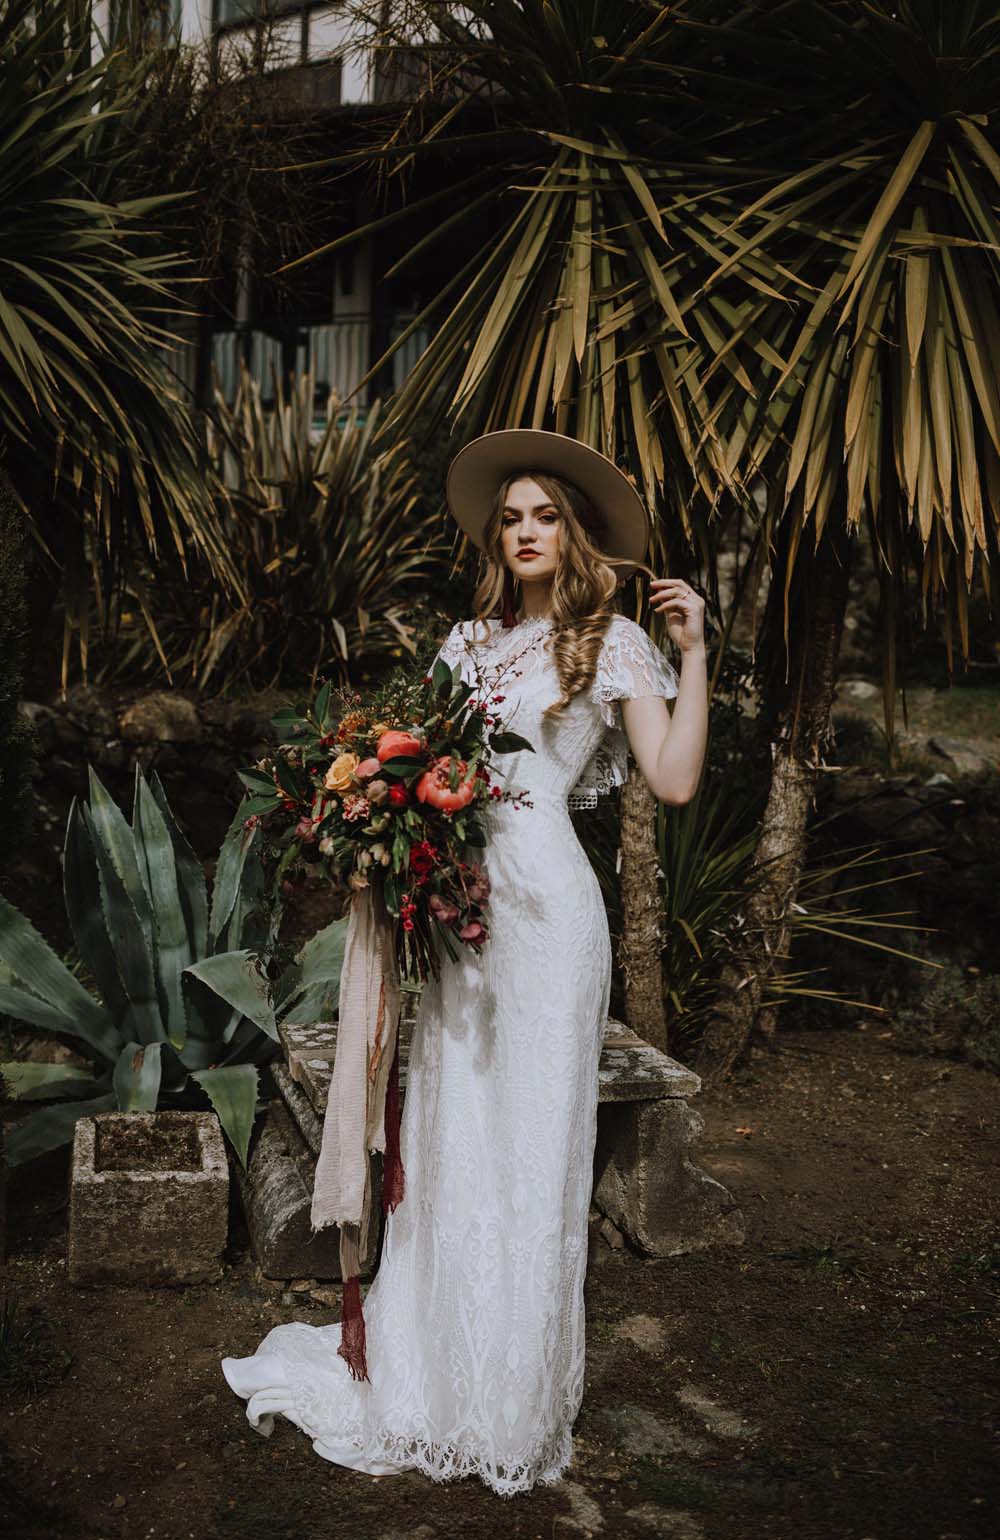 These Are The Details You Need For A Southwestern-Inspired Wedding - bride